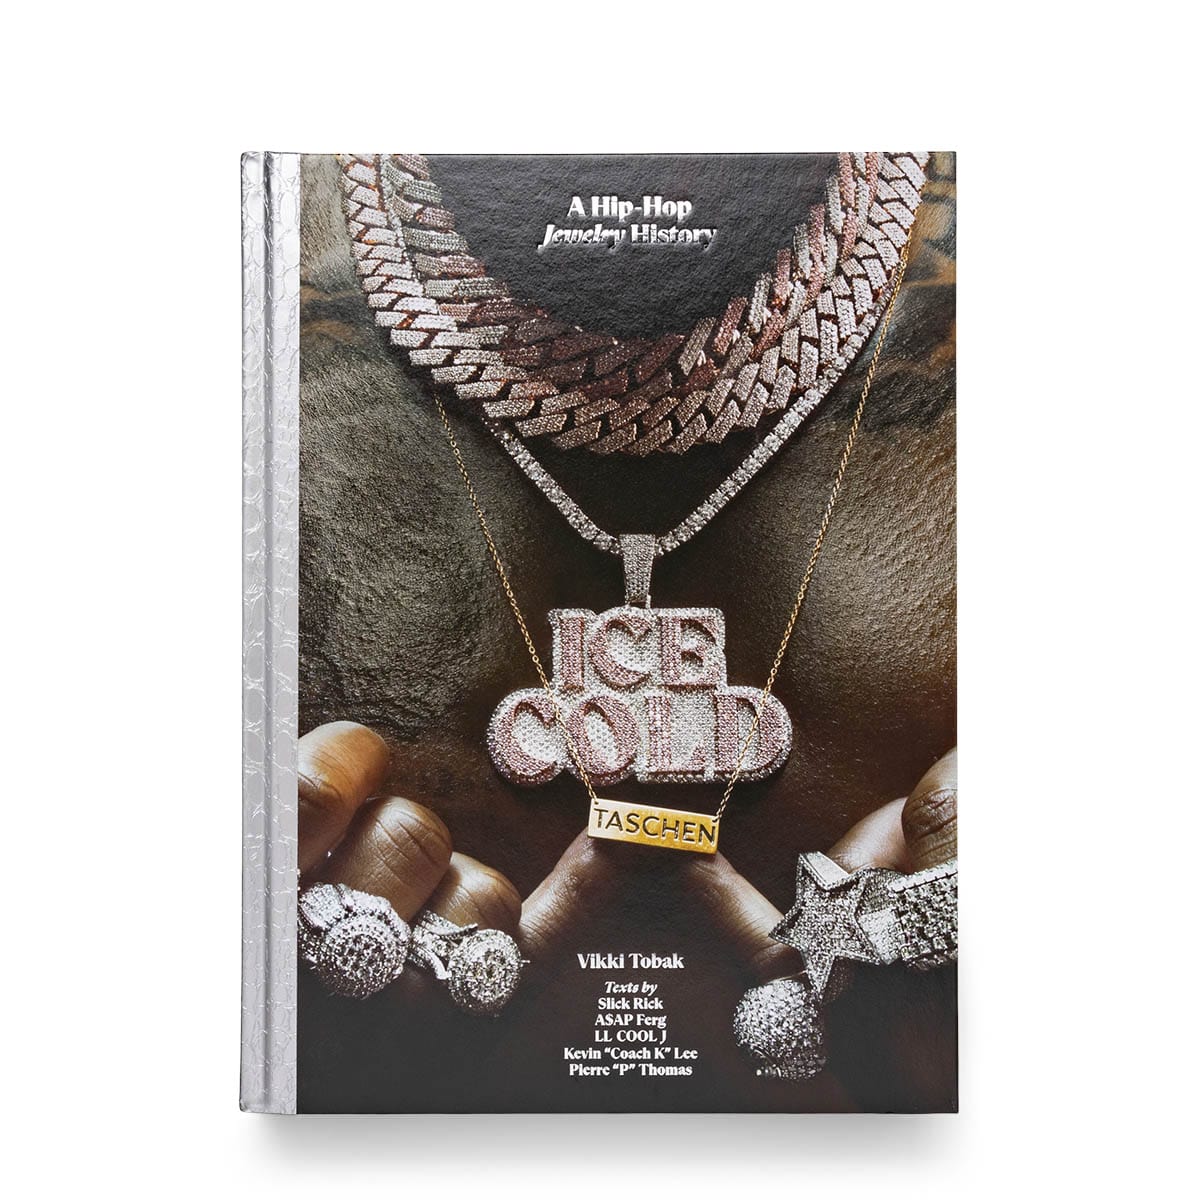 TASCHEN PUBLISHING Books N/A / O/S ICE COLD: A HIP-HOP JEWELRY HISTORY